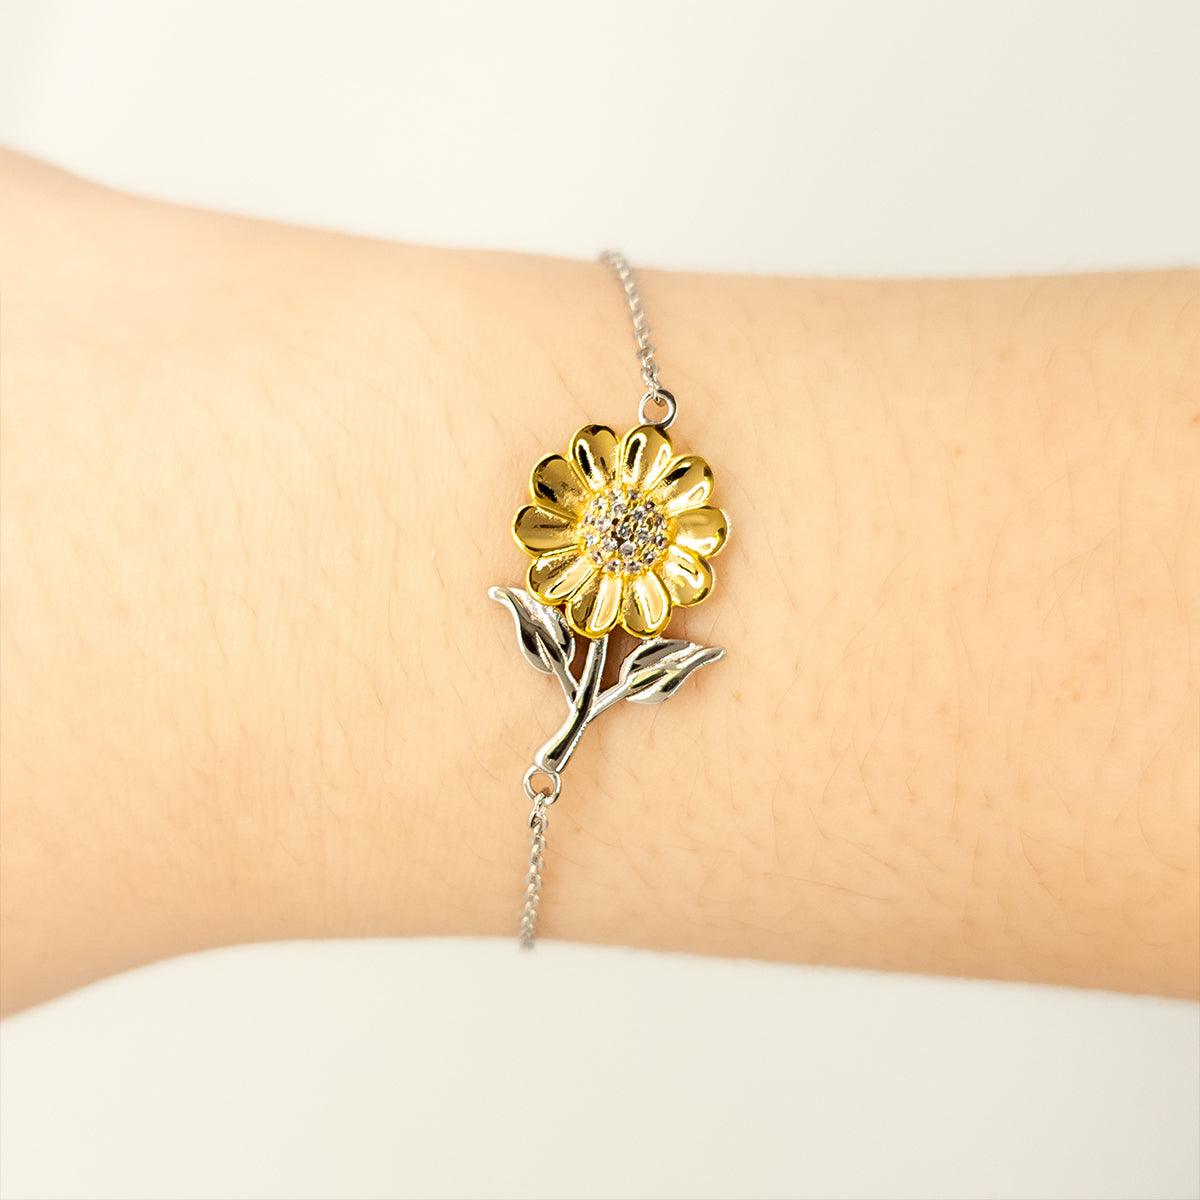 Remarkable Pharmacy Technician Gifts, Your dedication and hard work, Inspirational Birthday Christmas Unique Sunflower Bracelet For Pharmacy Technician, Coworkers, Men, Women, Friends - Mallard Moon Gift Shop